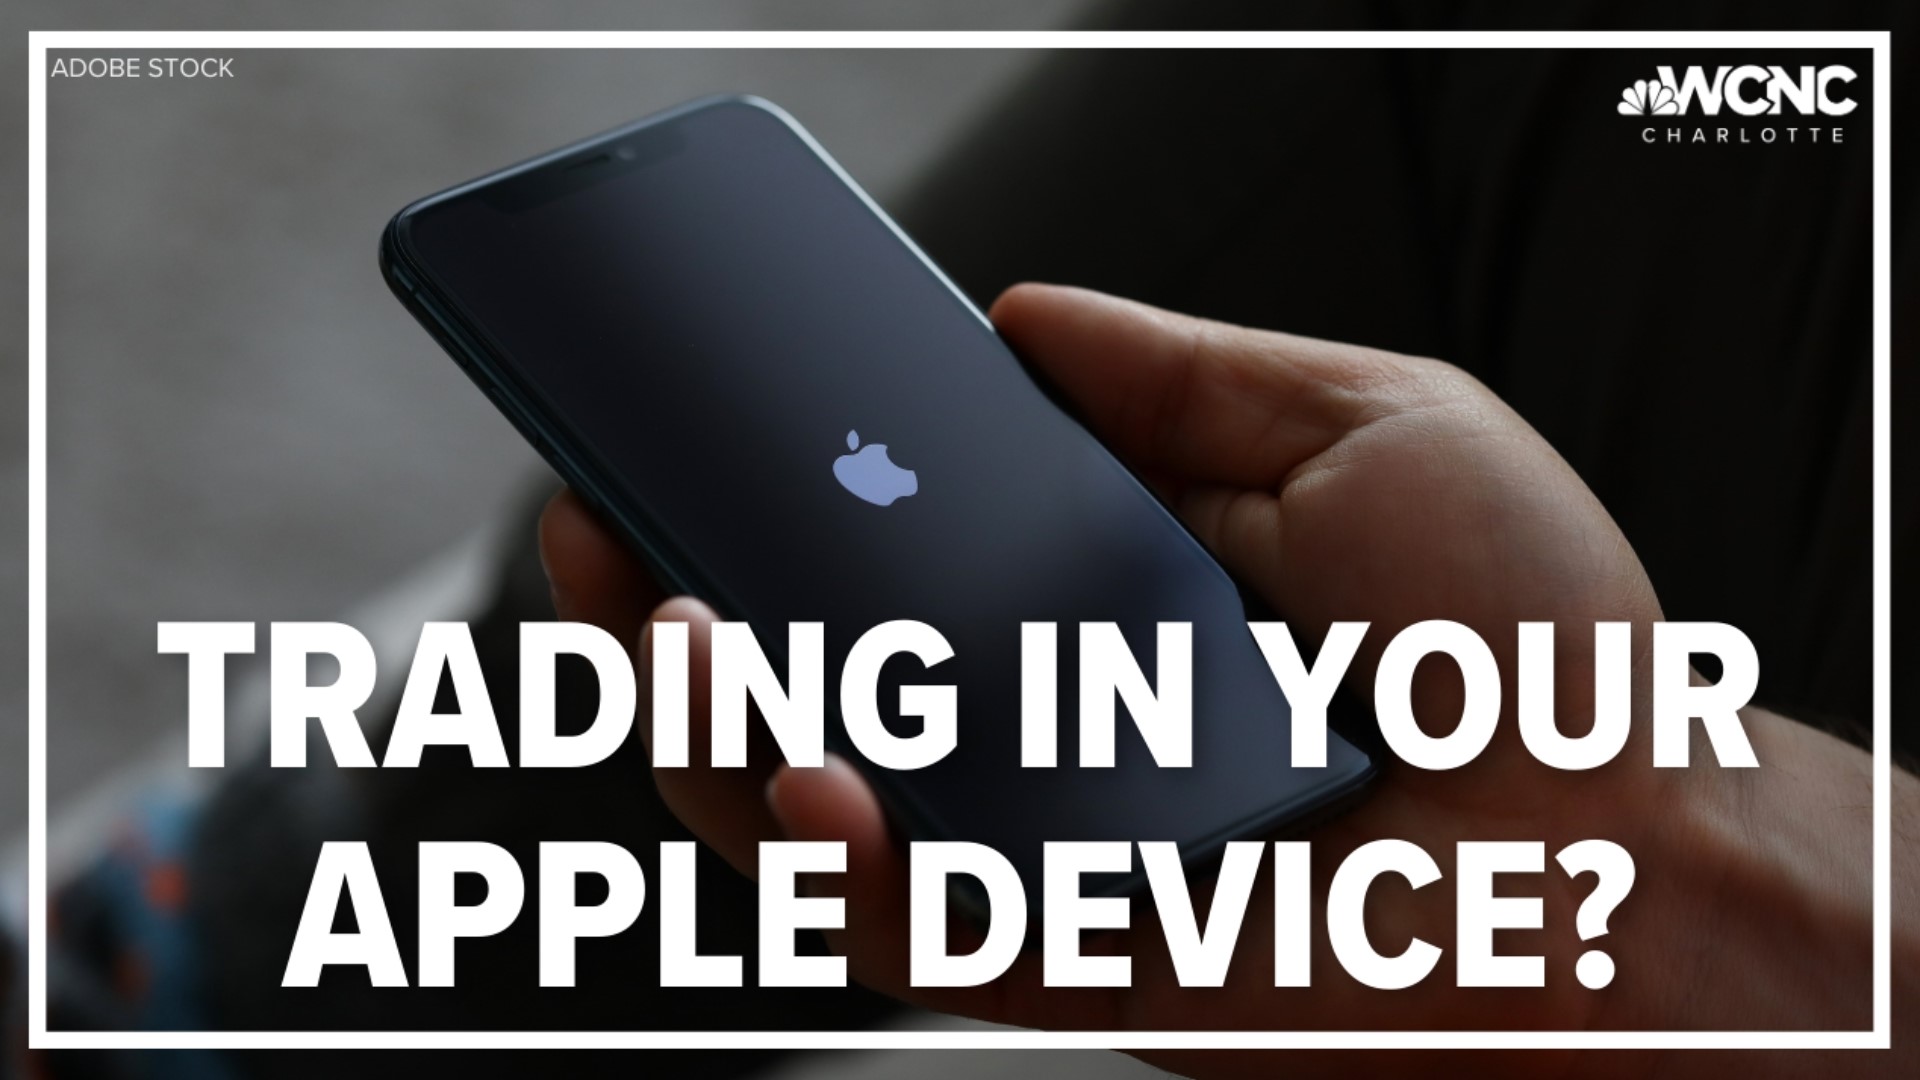 The trade value for Apple devices have dropped on certain devices.